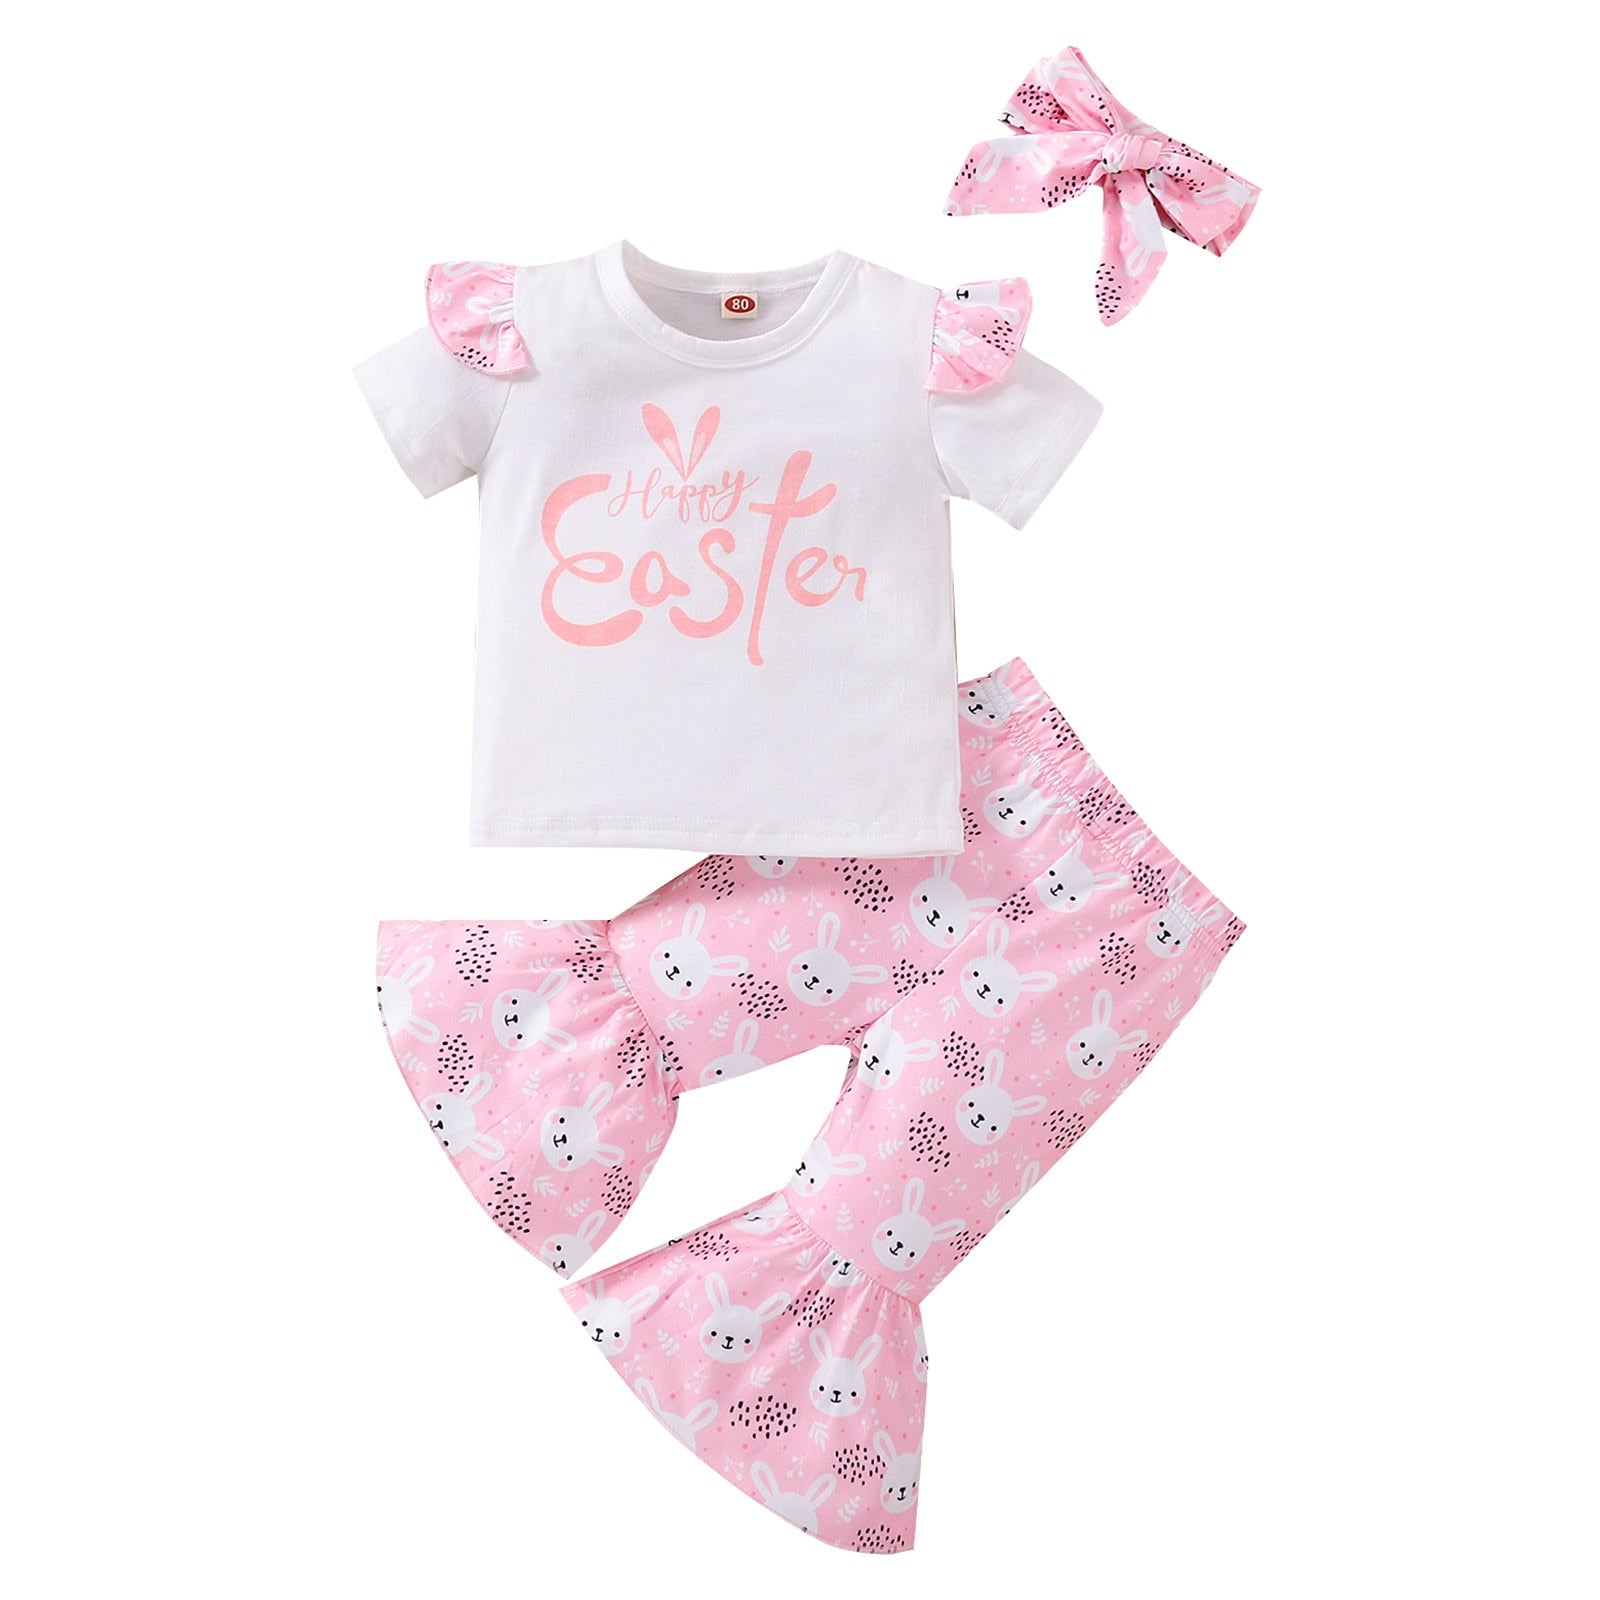 Adorable 3-Piece Summer Clothing Set for Toddler Baby Girls